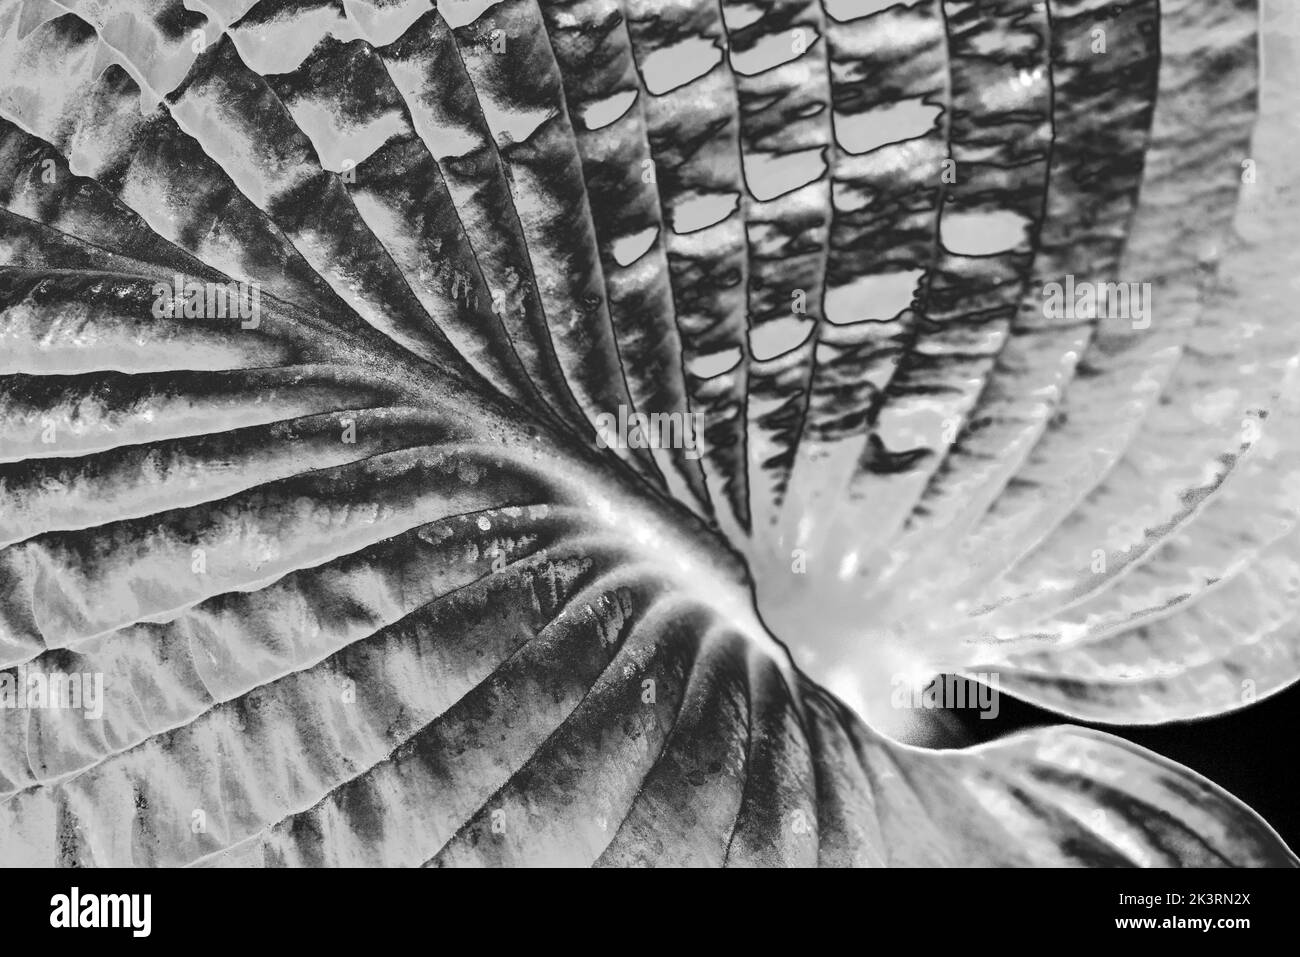 Close up of sunlight revealing the heavily ribbed leaf of a Hosta plant. Sculptural planting. Abstract texture / pattern, black and white background. Stock Photo